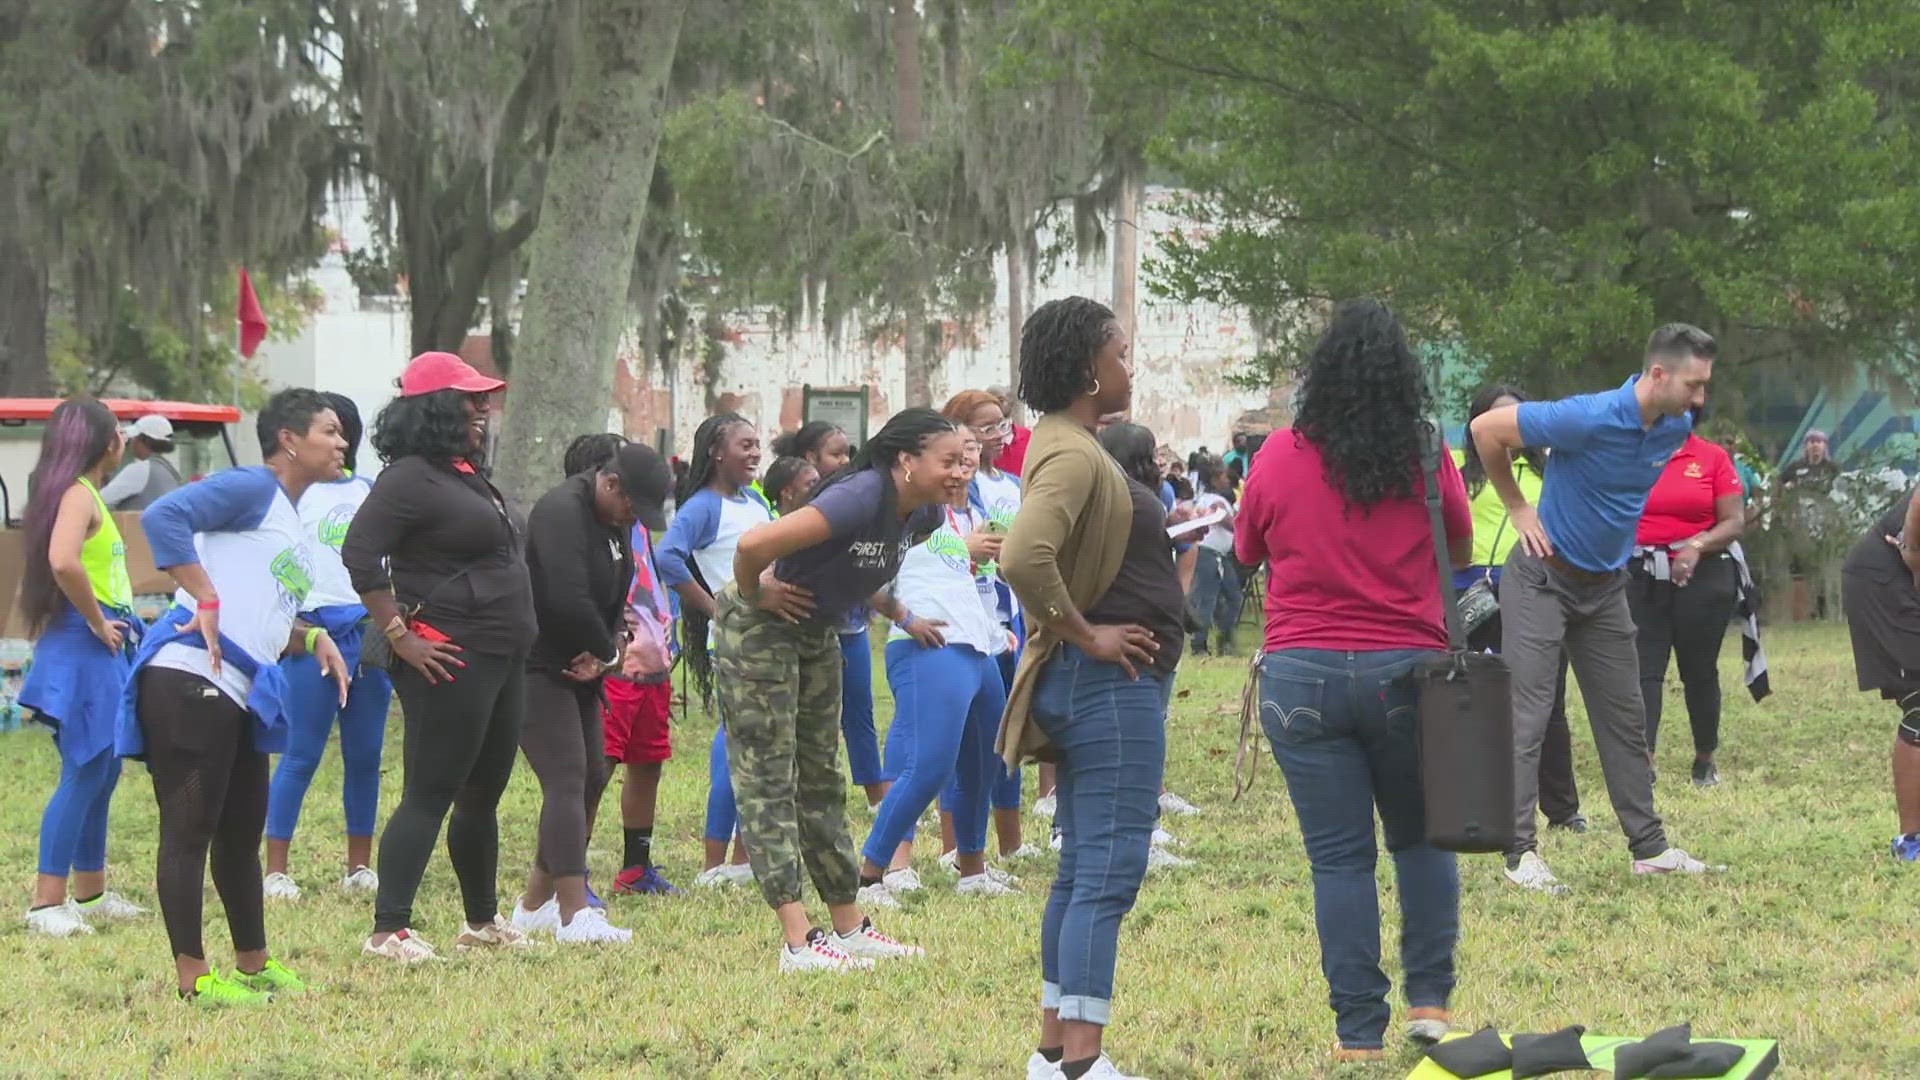 Hundreds were at Klutho Park to participate in the healthy food & fitness festival, which included outdoor activities, stage performances, and food demonstrations.